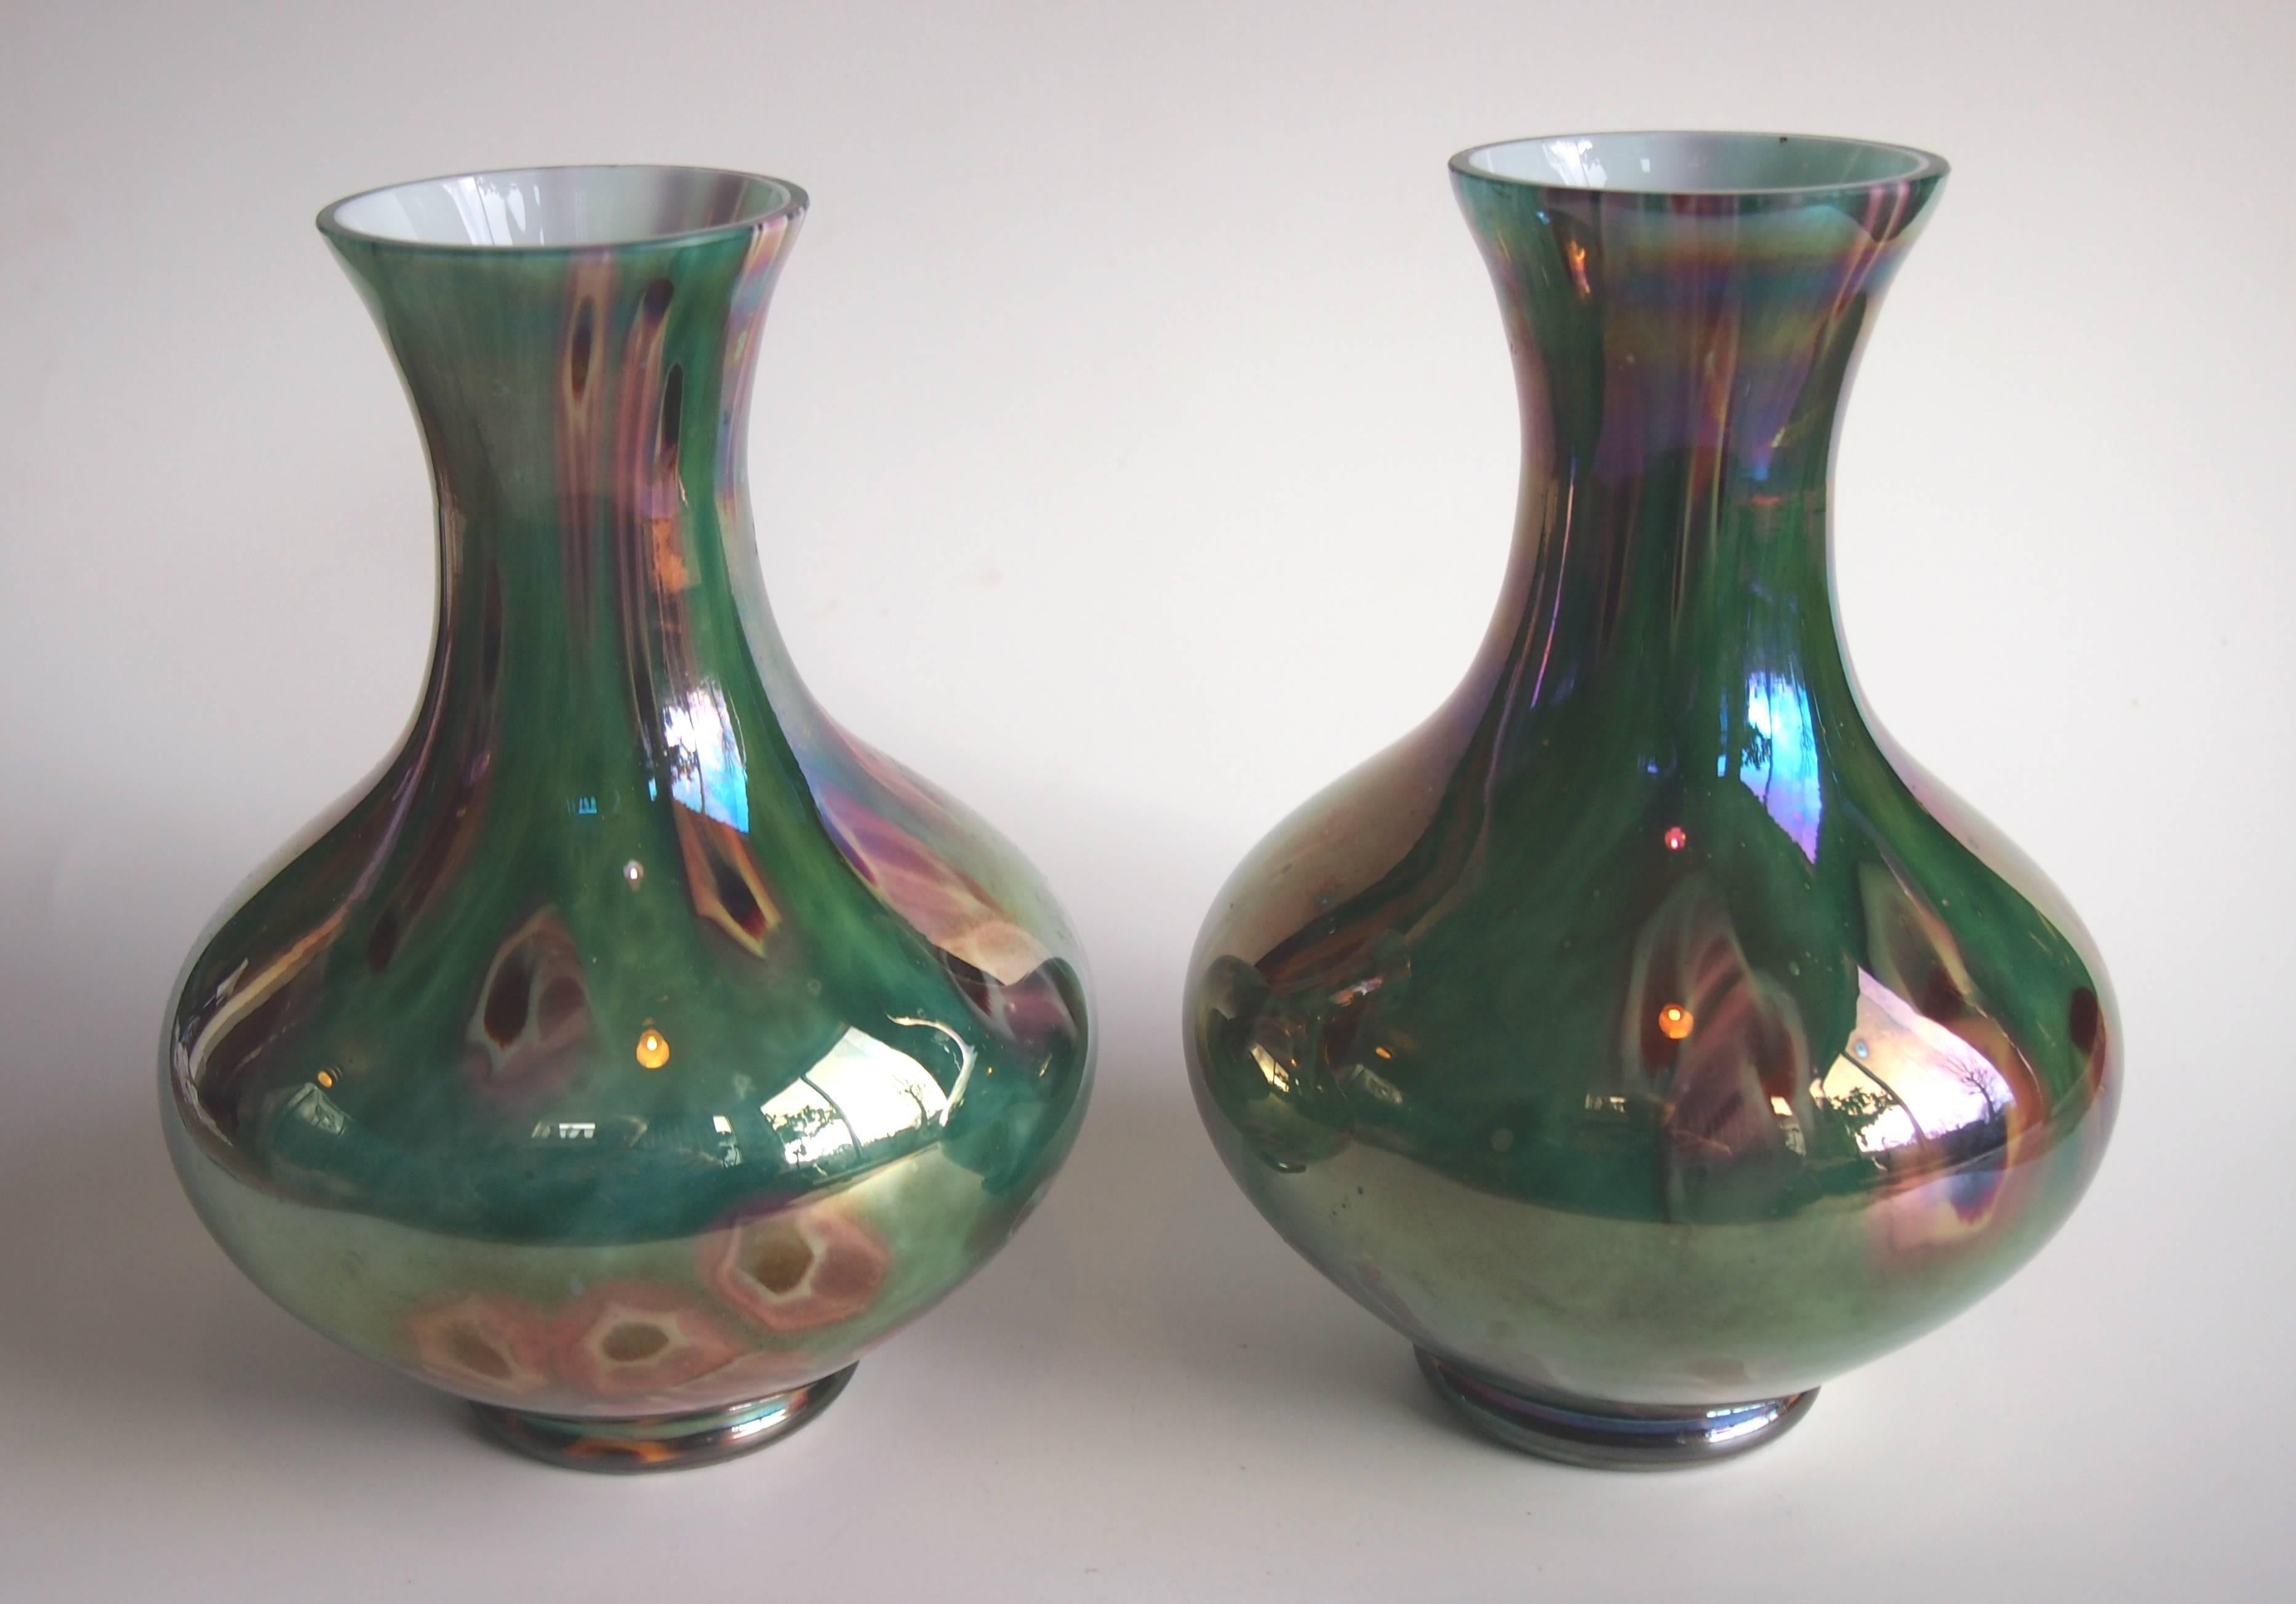 Super pair of Kralik Art Deco cased iridised 'paperweight' vases. These are made by using cut paperweight canes that are applied to the surface of the vase before it is blown, so that in the finished blown pieces the cane segments appear large. The